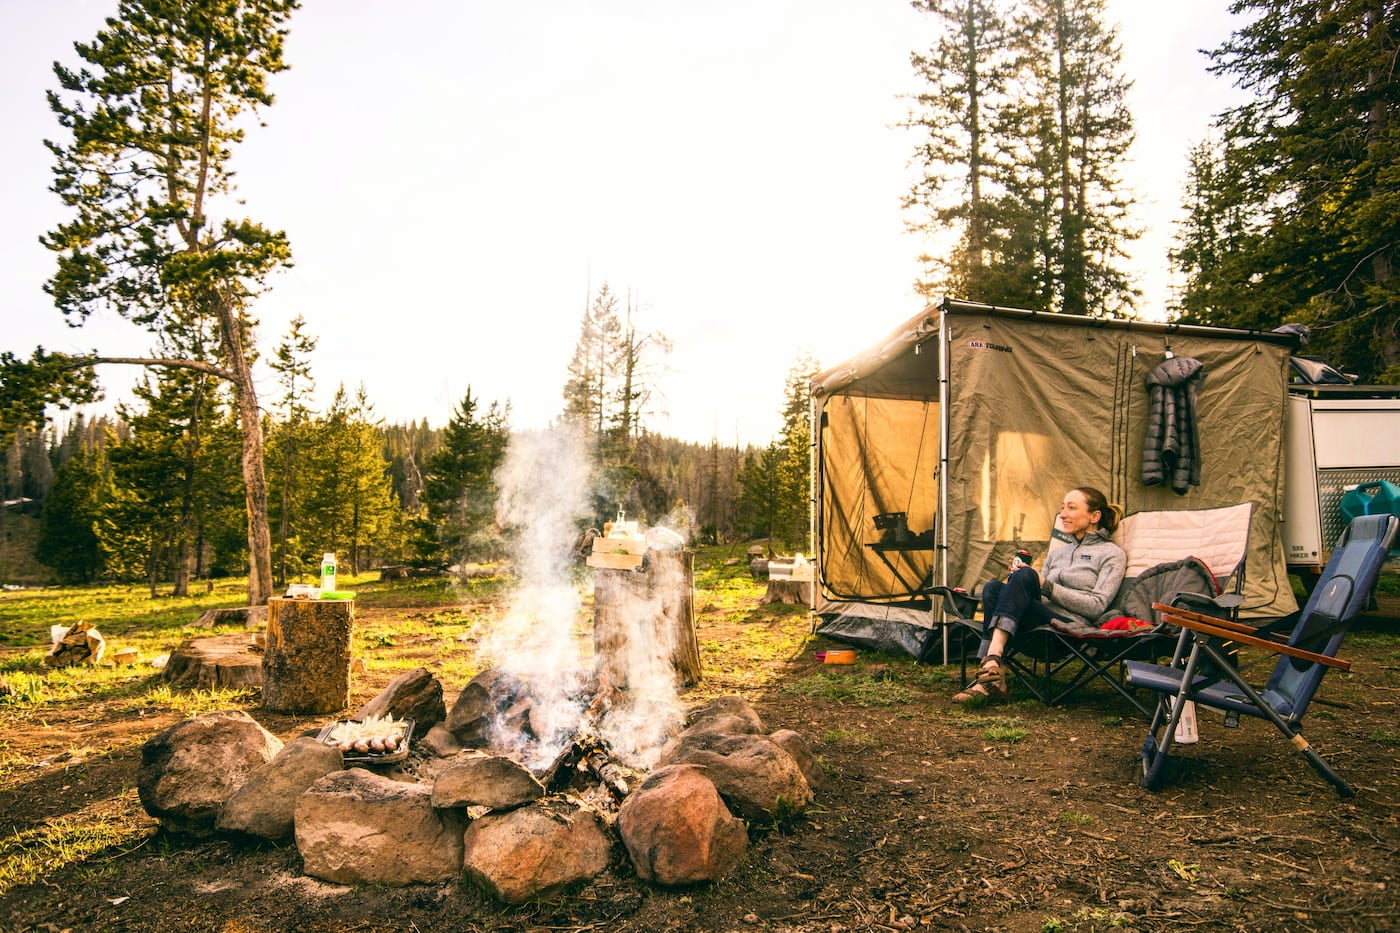 Women lounging beside campfire and tent.